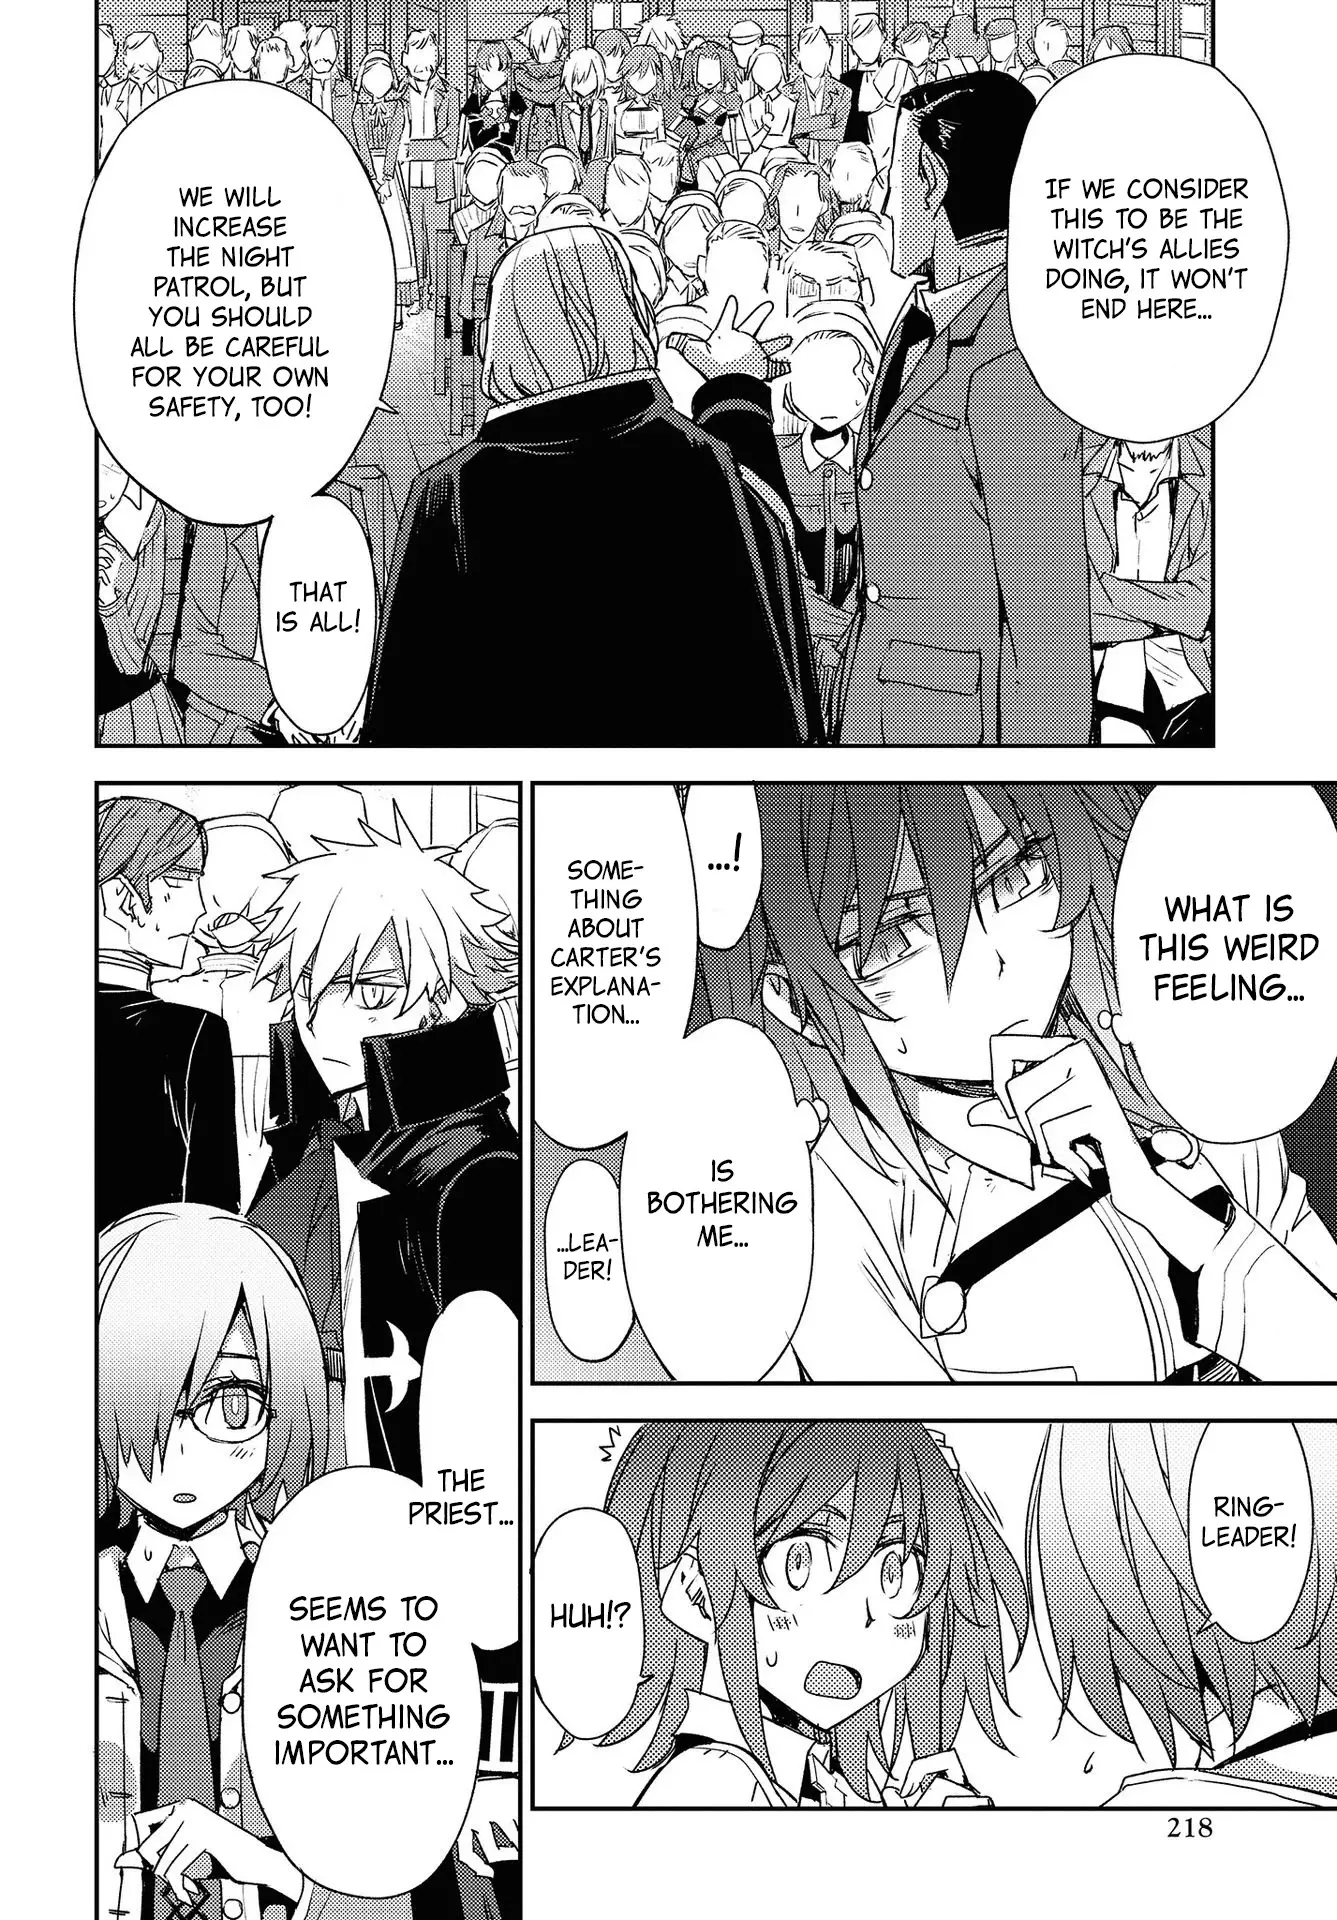 Fate/grand Order: Epic Of Remnant - Subspecies Singularity Iv: Taboo Advent Salem: Salem Of Heresy - 20 page 8-05e26b58